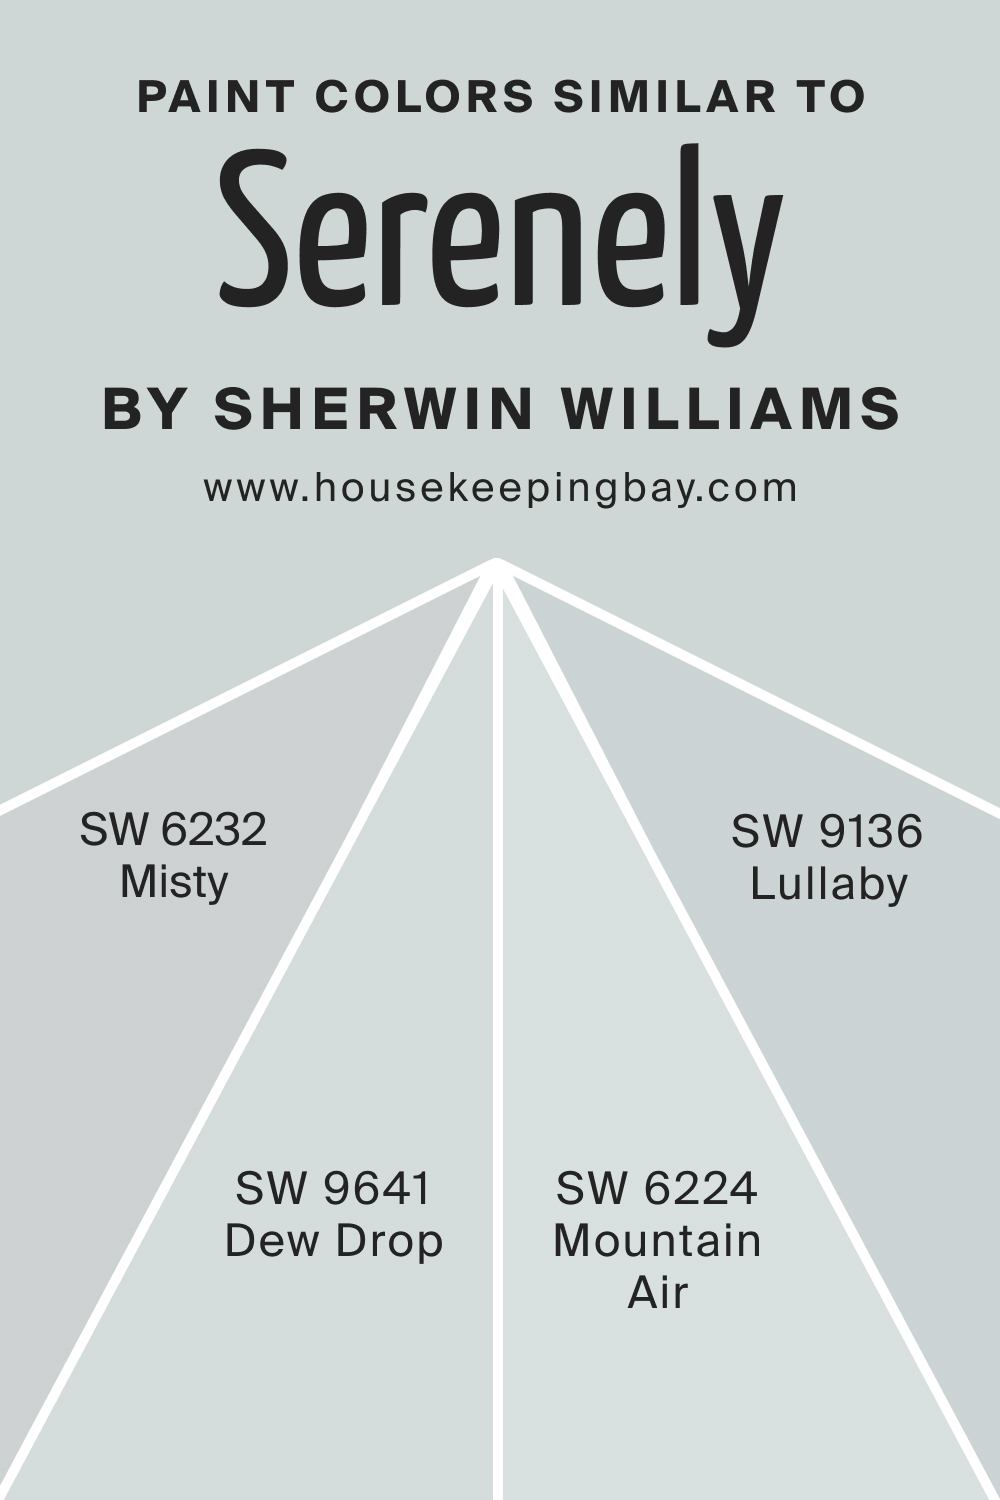 Paint Color Similar to SW 9632 Serenely by Sherwin Williams